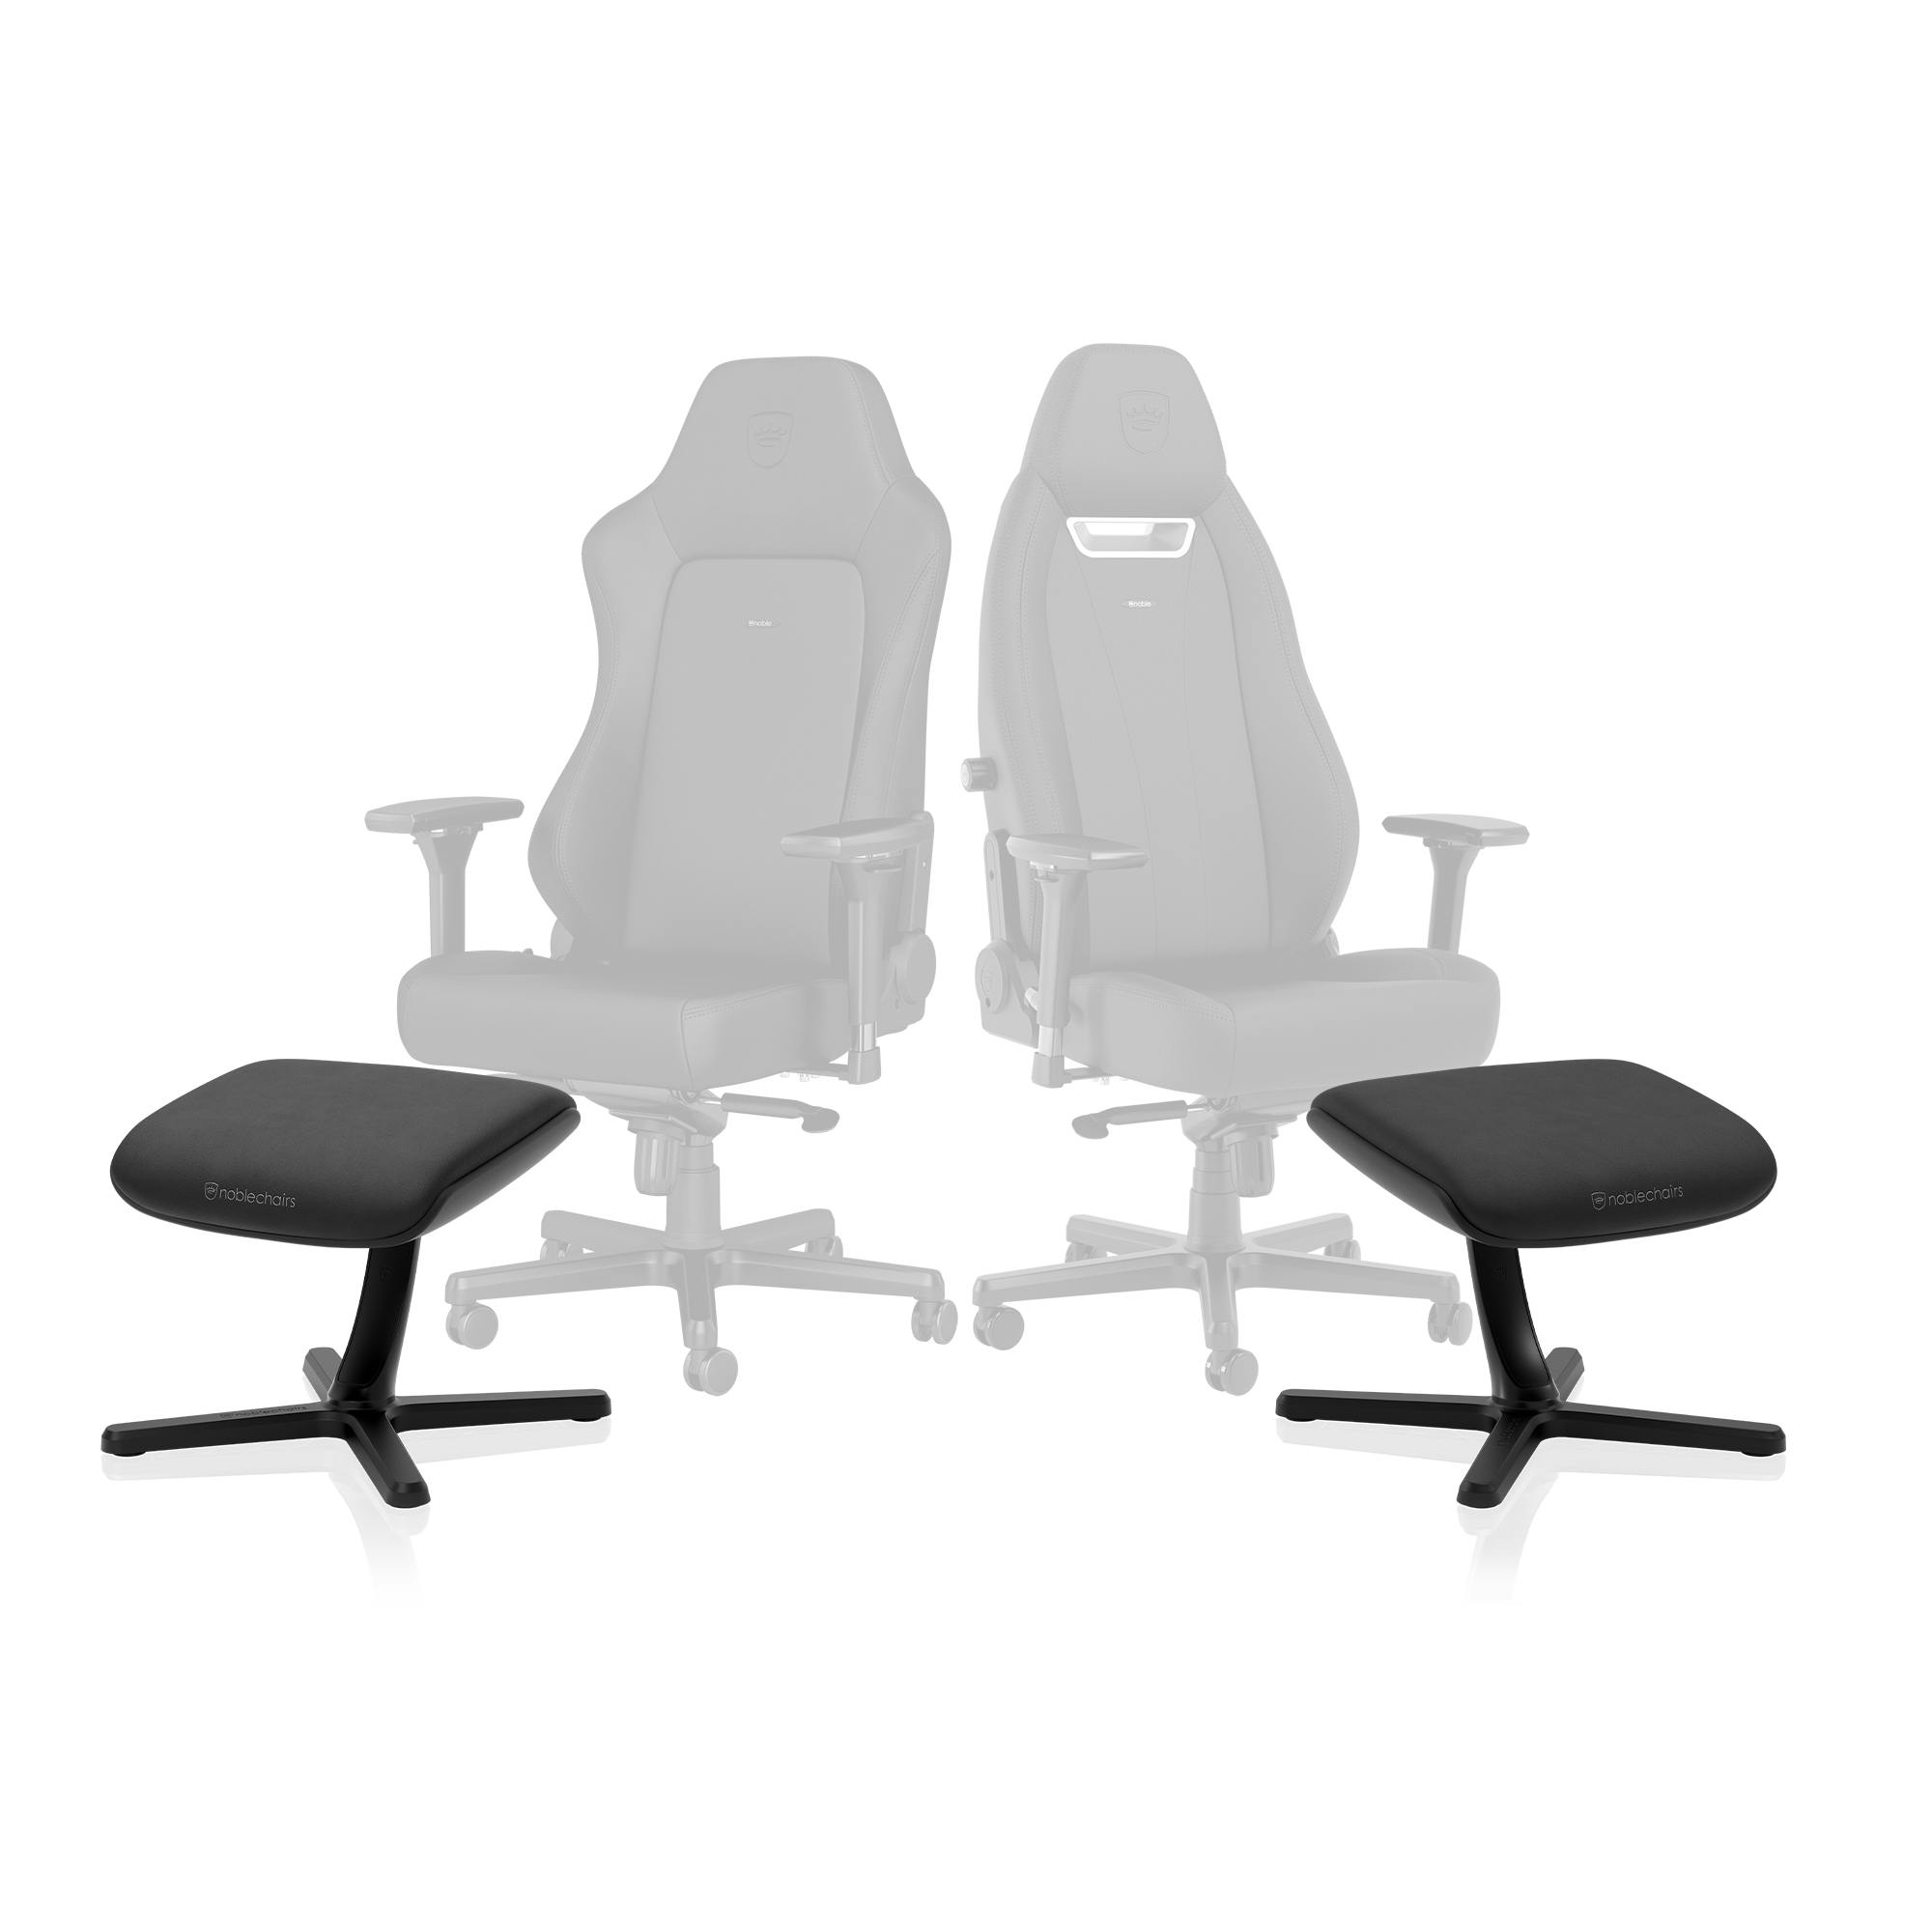 noblechairs - Repose-Pieds 2 - Black Edition